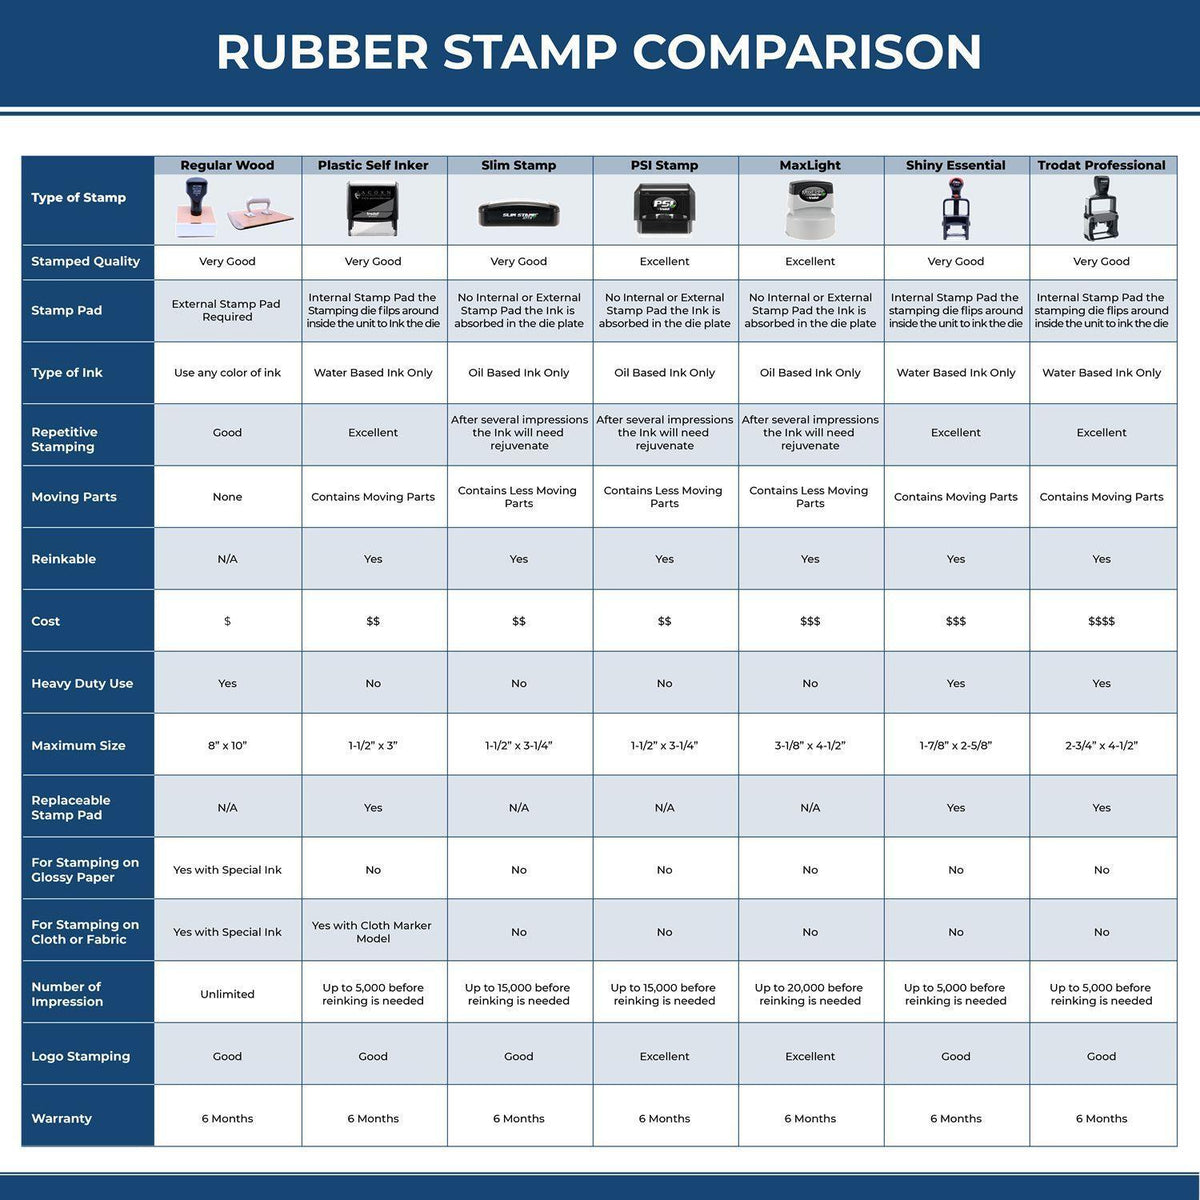 Large Pre-Inked Faxed on Stamp 4879SLIM Rubber Stamp Comparison